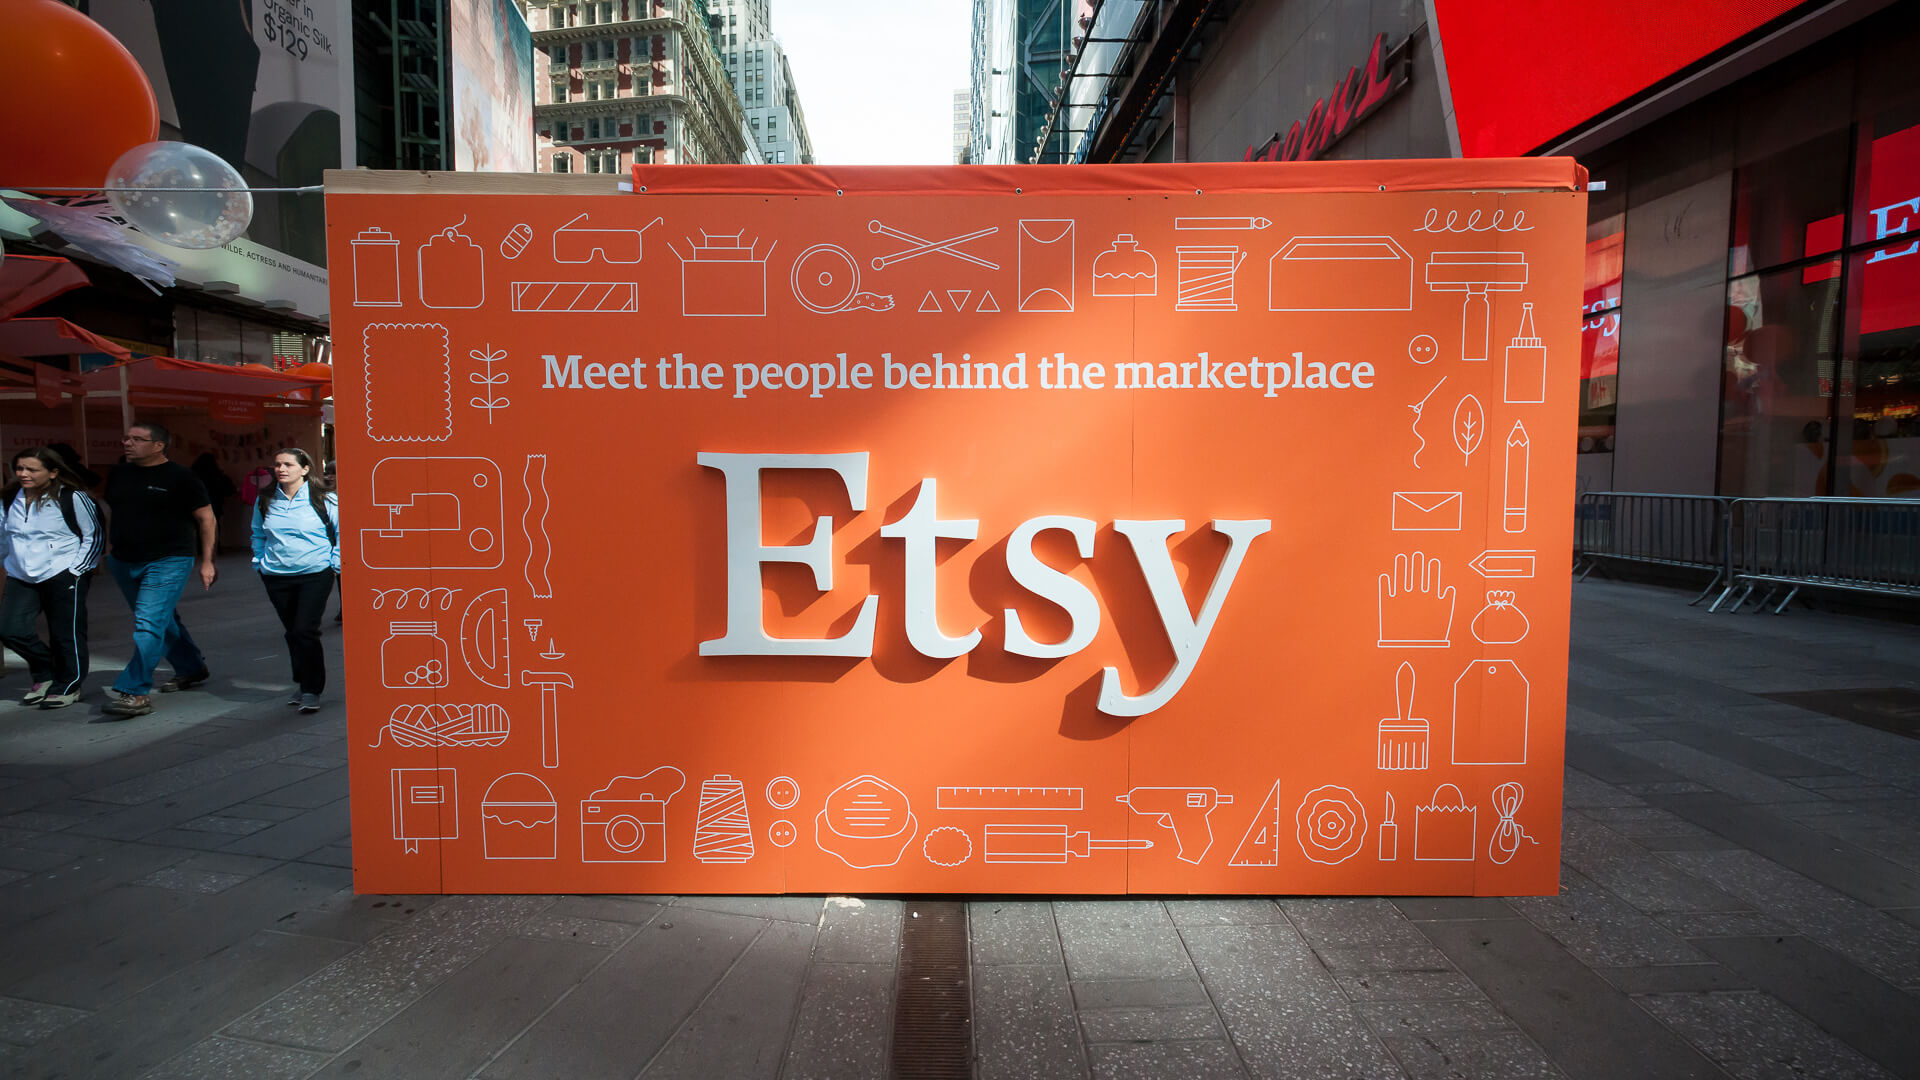 What Are the Top Items To Sell on Etsy? July 2022 Edition - GOBankingRates